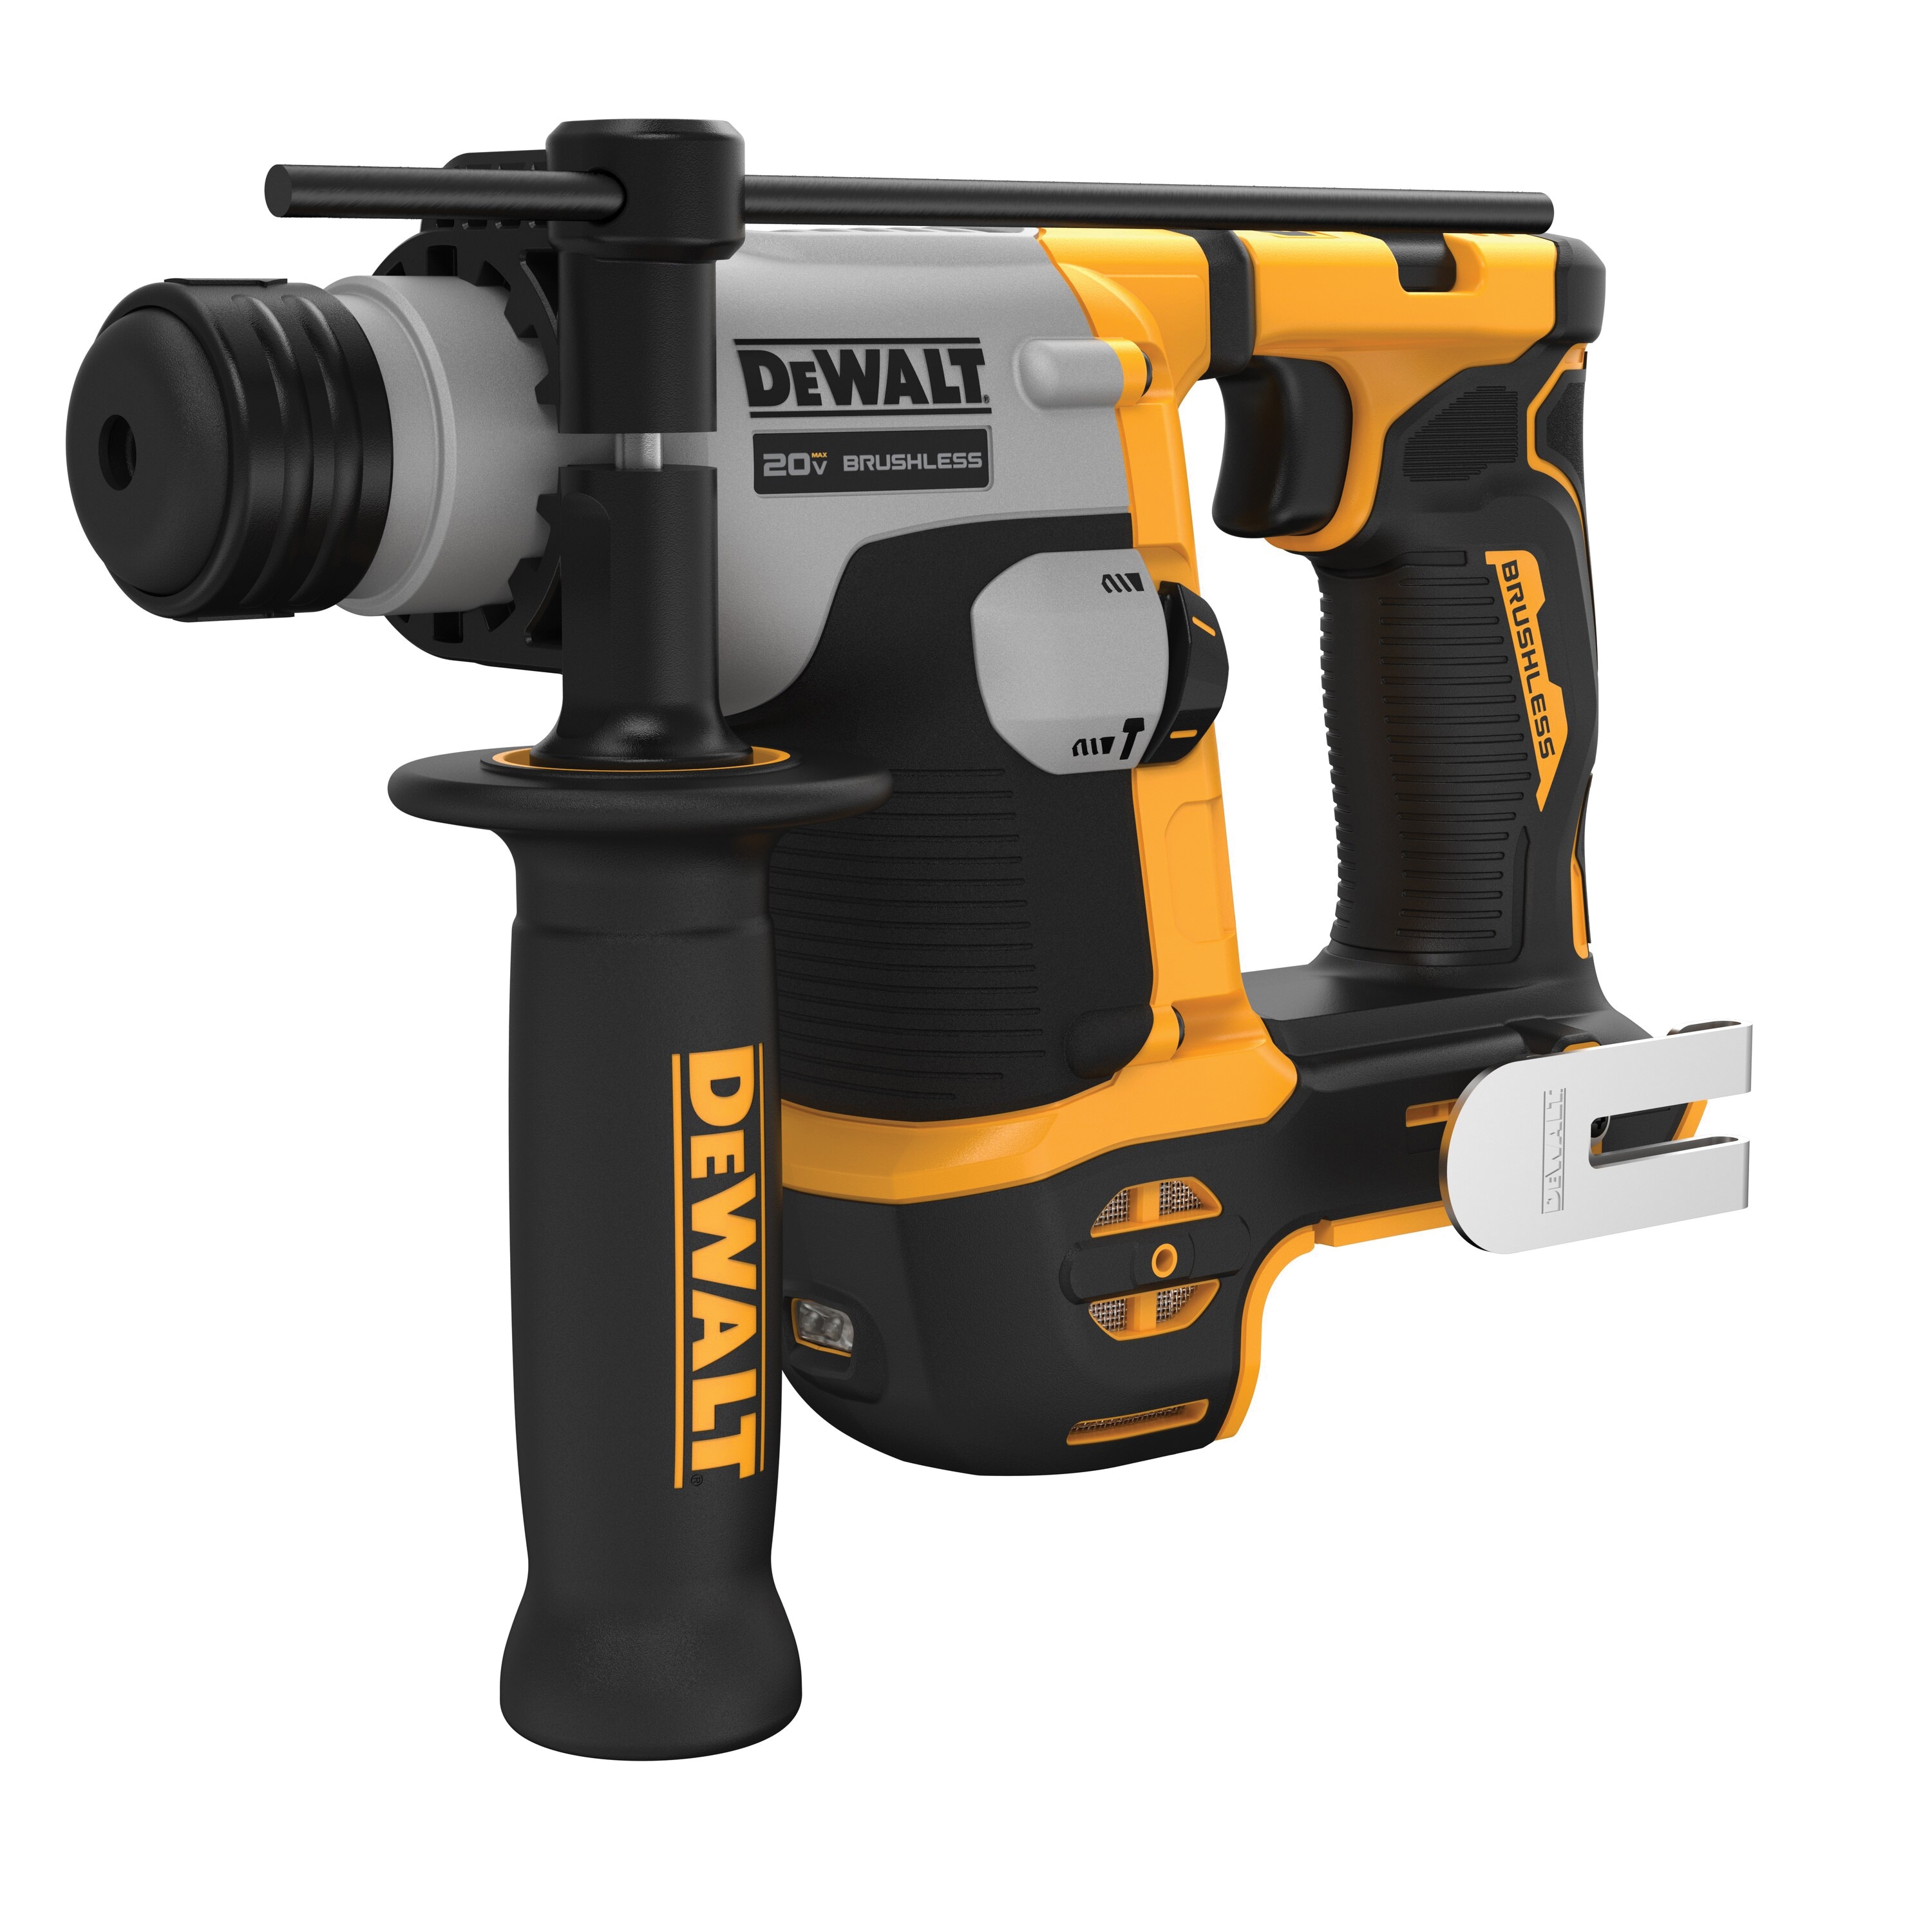 DeWALT DCH172B Cordless Rotary Hammer, Tool Only, 20 V, 5/8 in Chuck, SDS Plus Chuck, 0 to 1100 bpm - 1